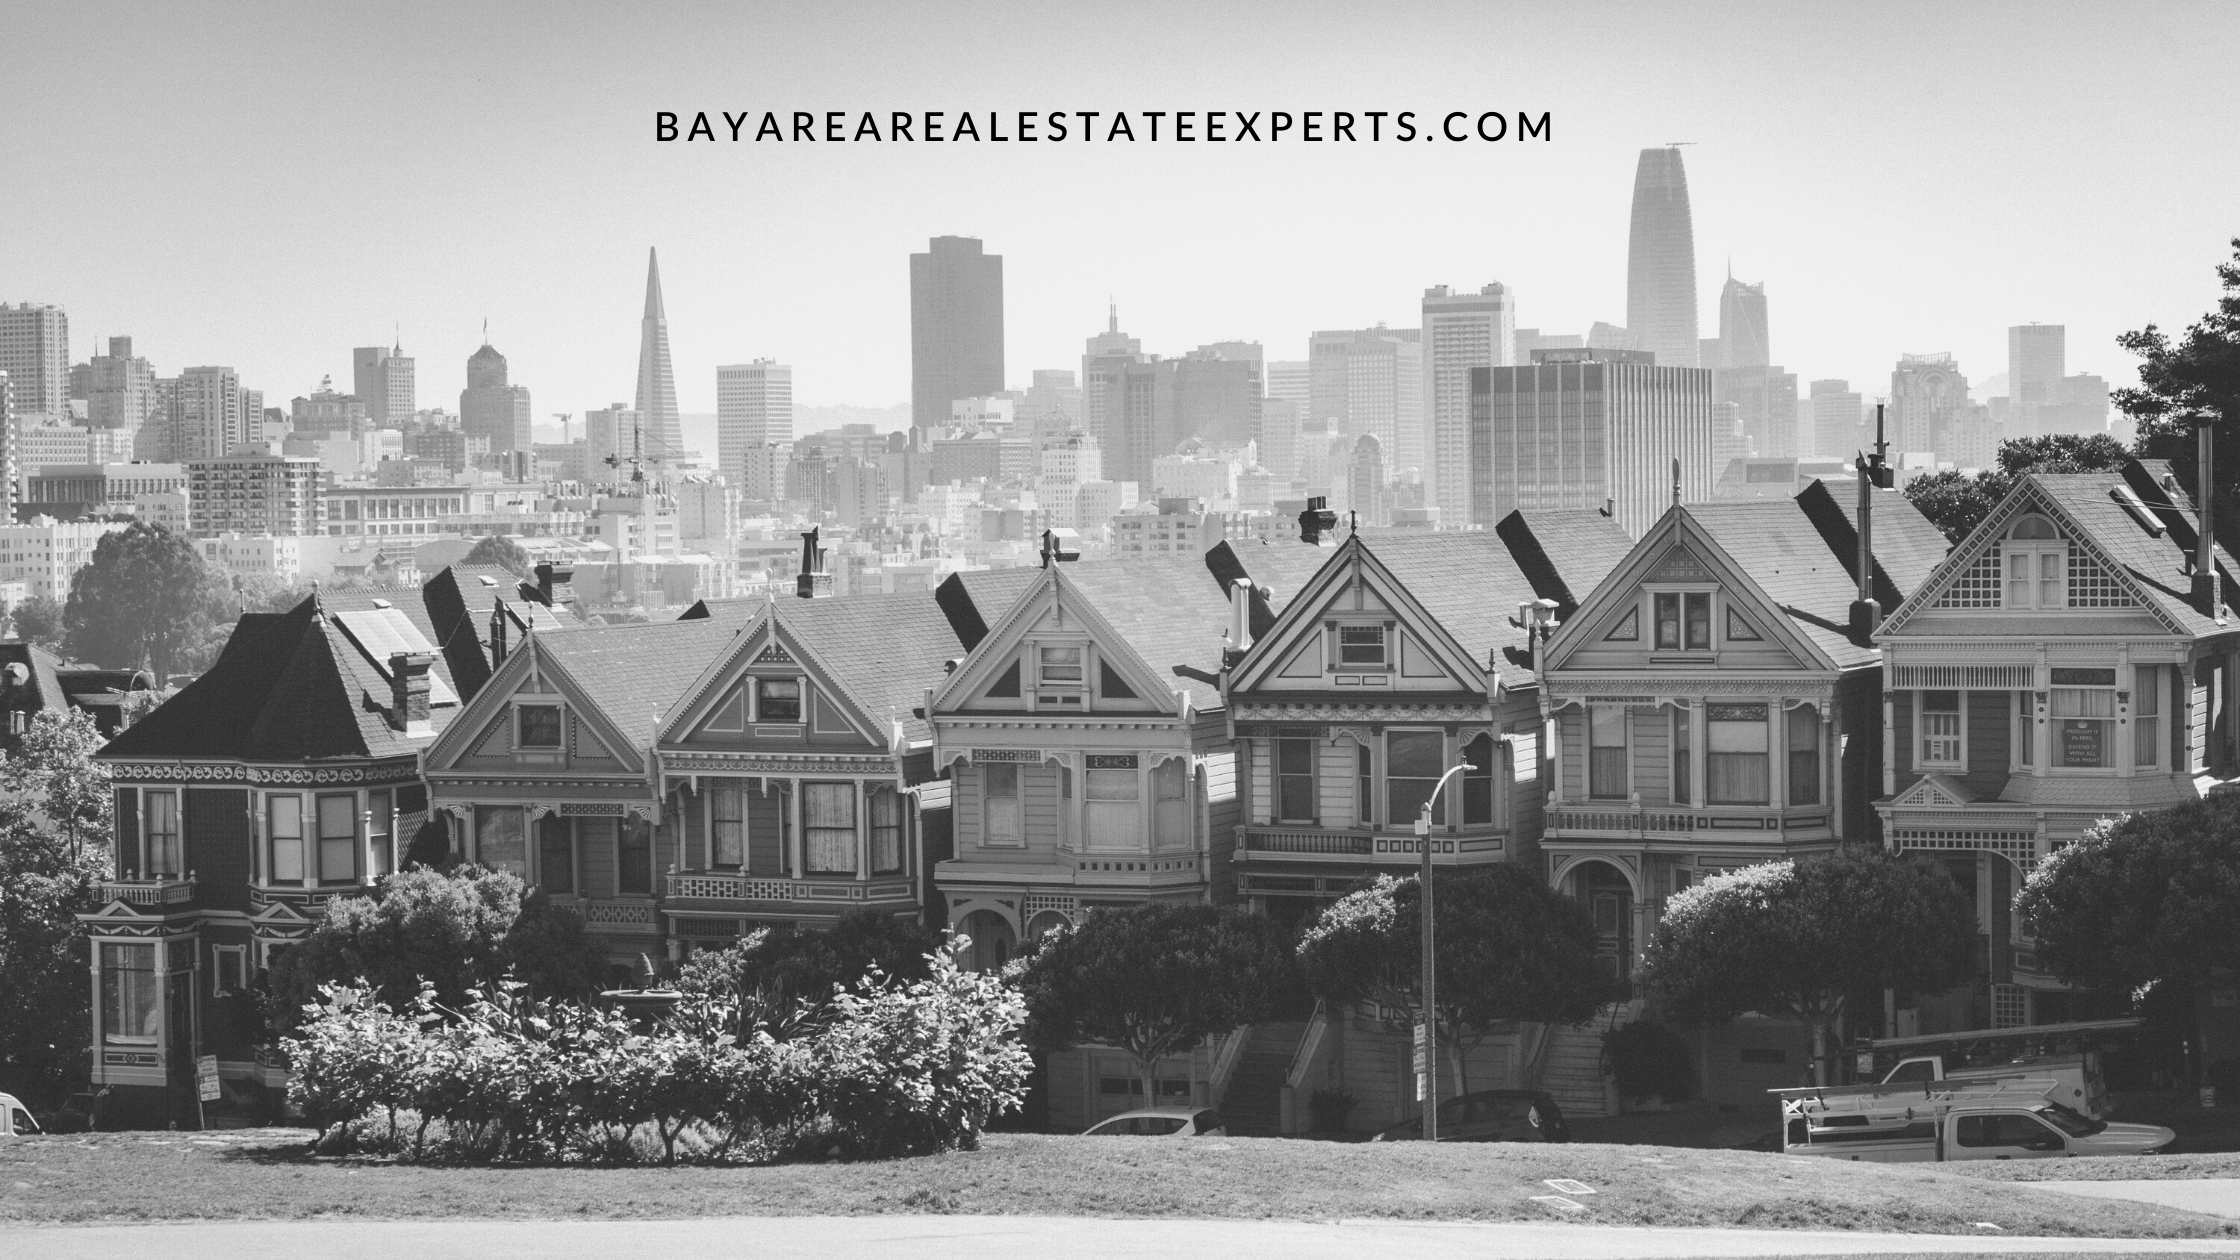 Real Estate for Sale, bay area real estate for sale, for sale, expert tips, real estate tips